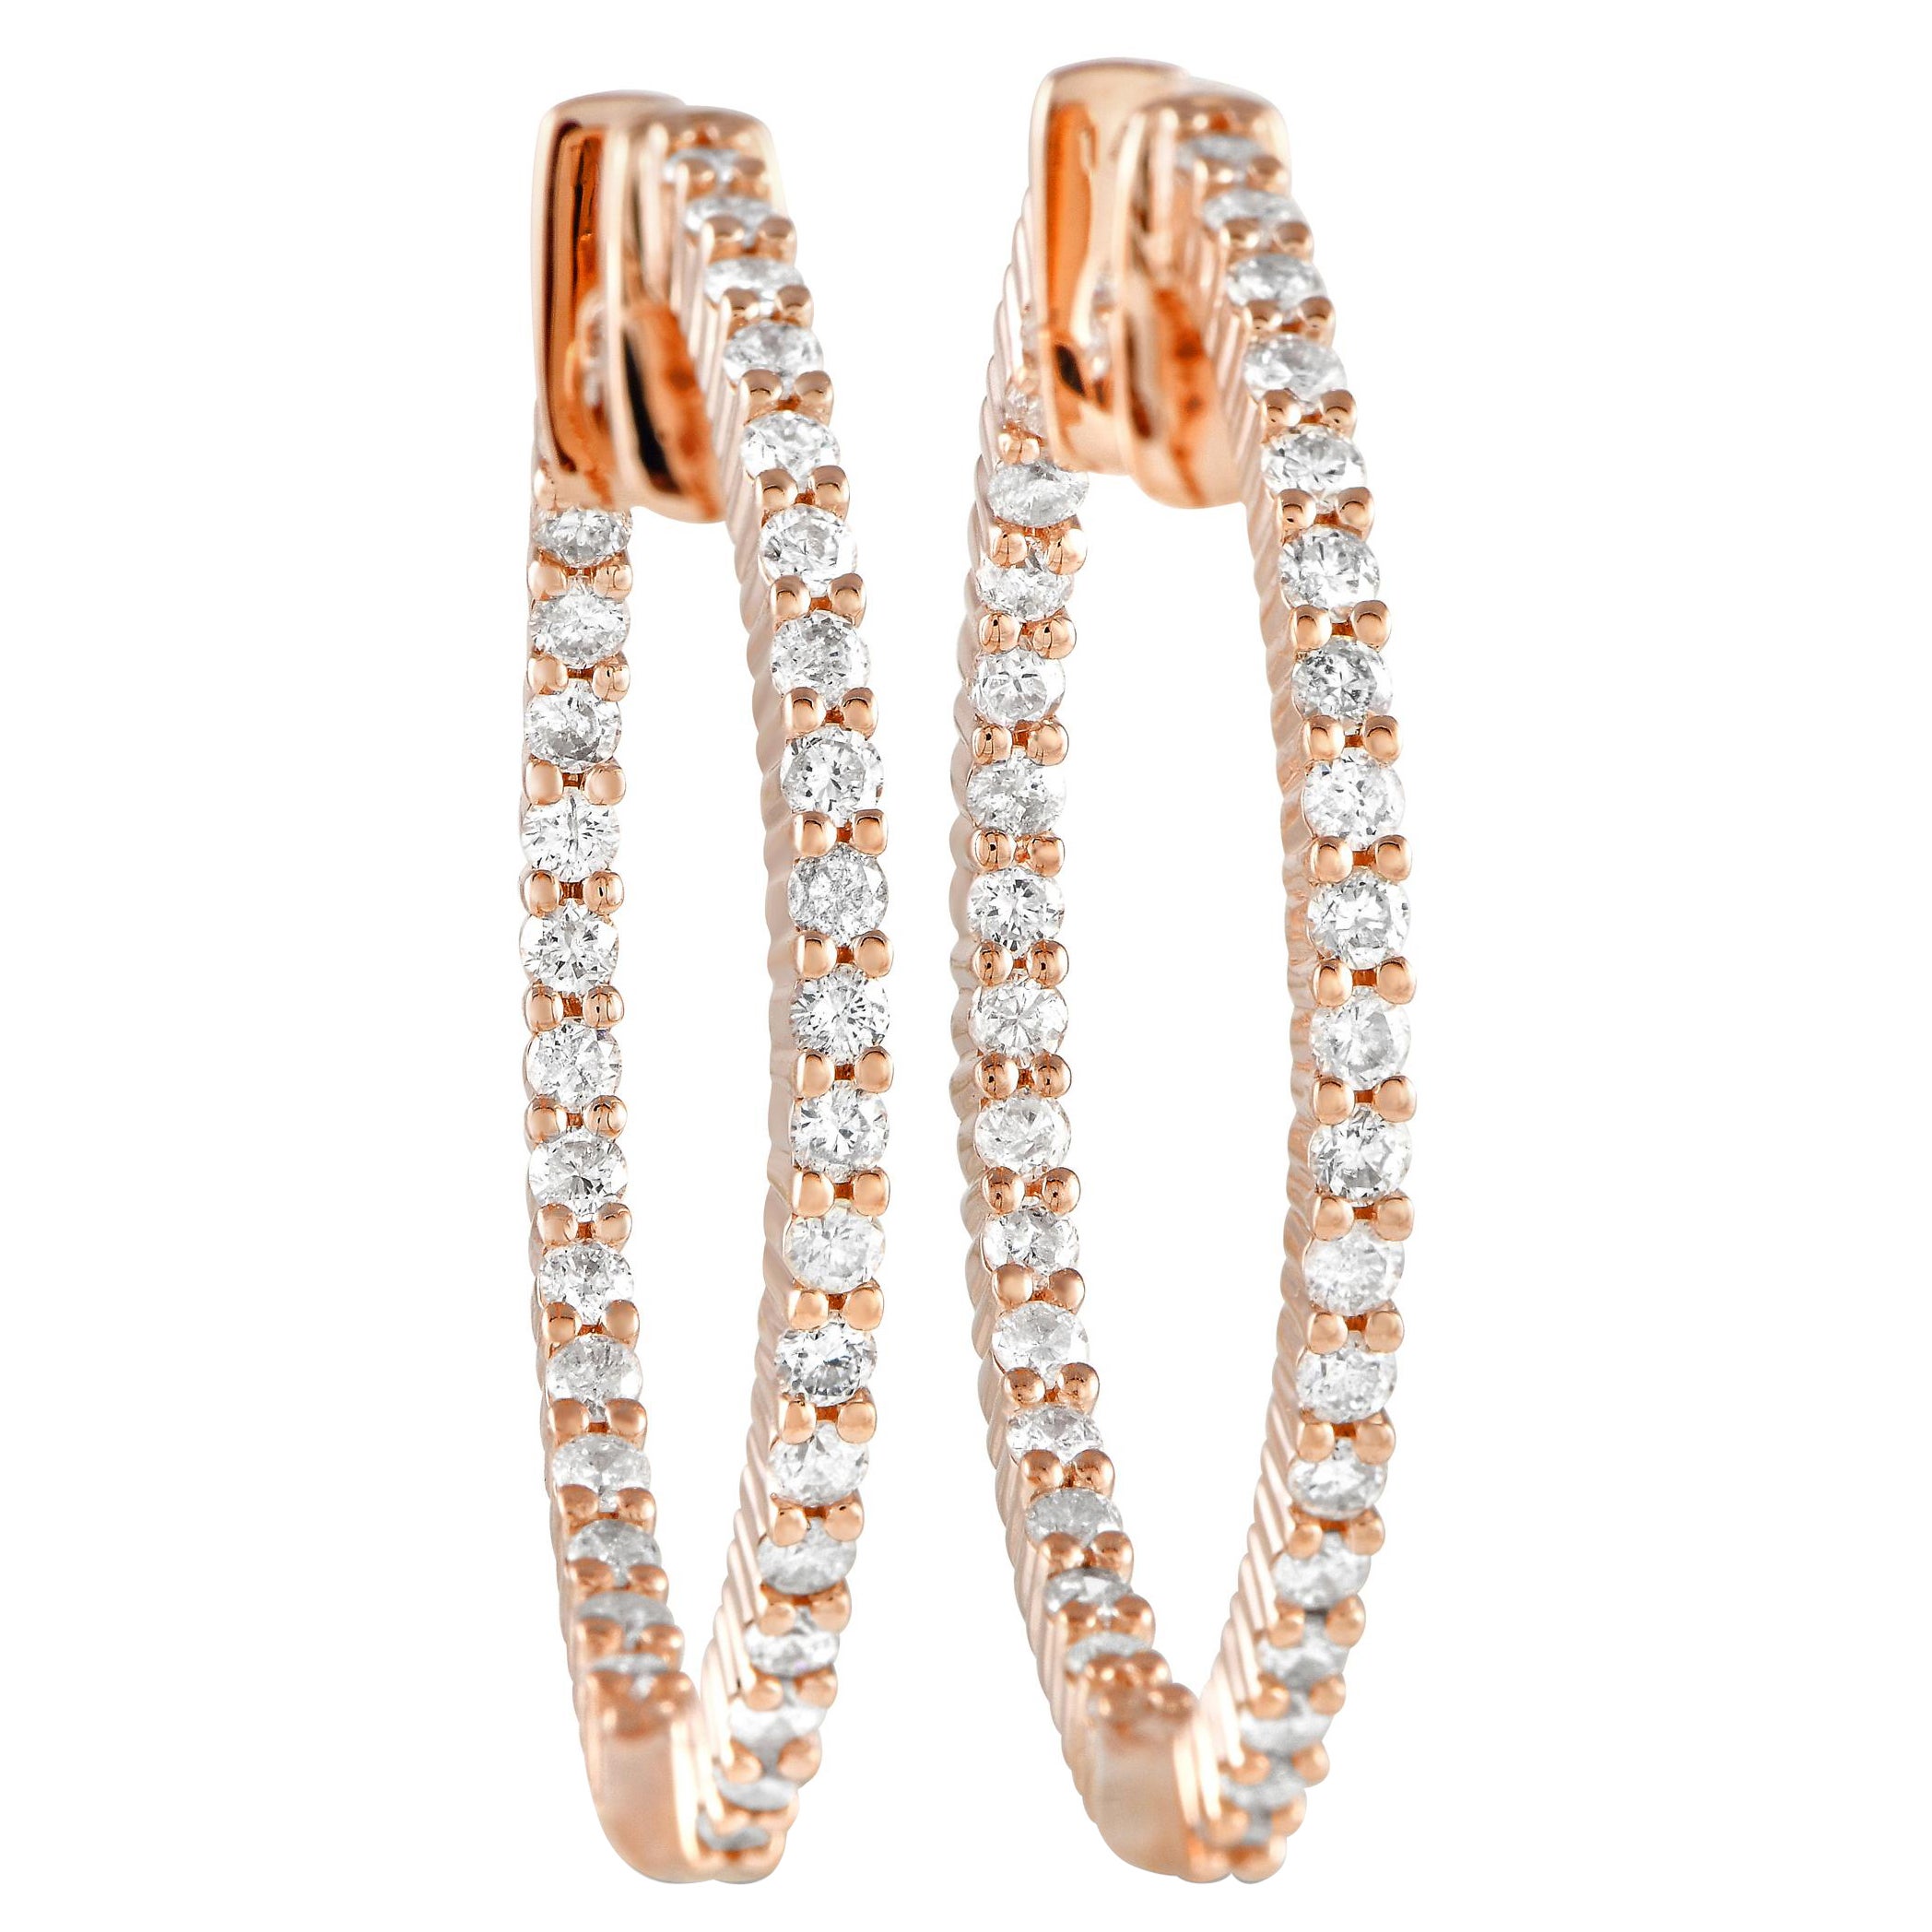 Lb Exclusive 14k Rose Gold 1.0 Carat Diamonds Inside-Out Hoop Earrings For Sale